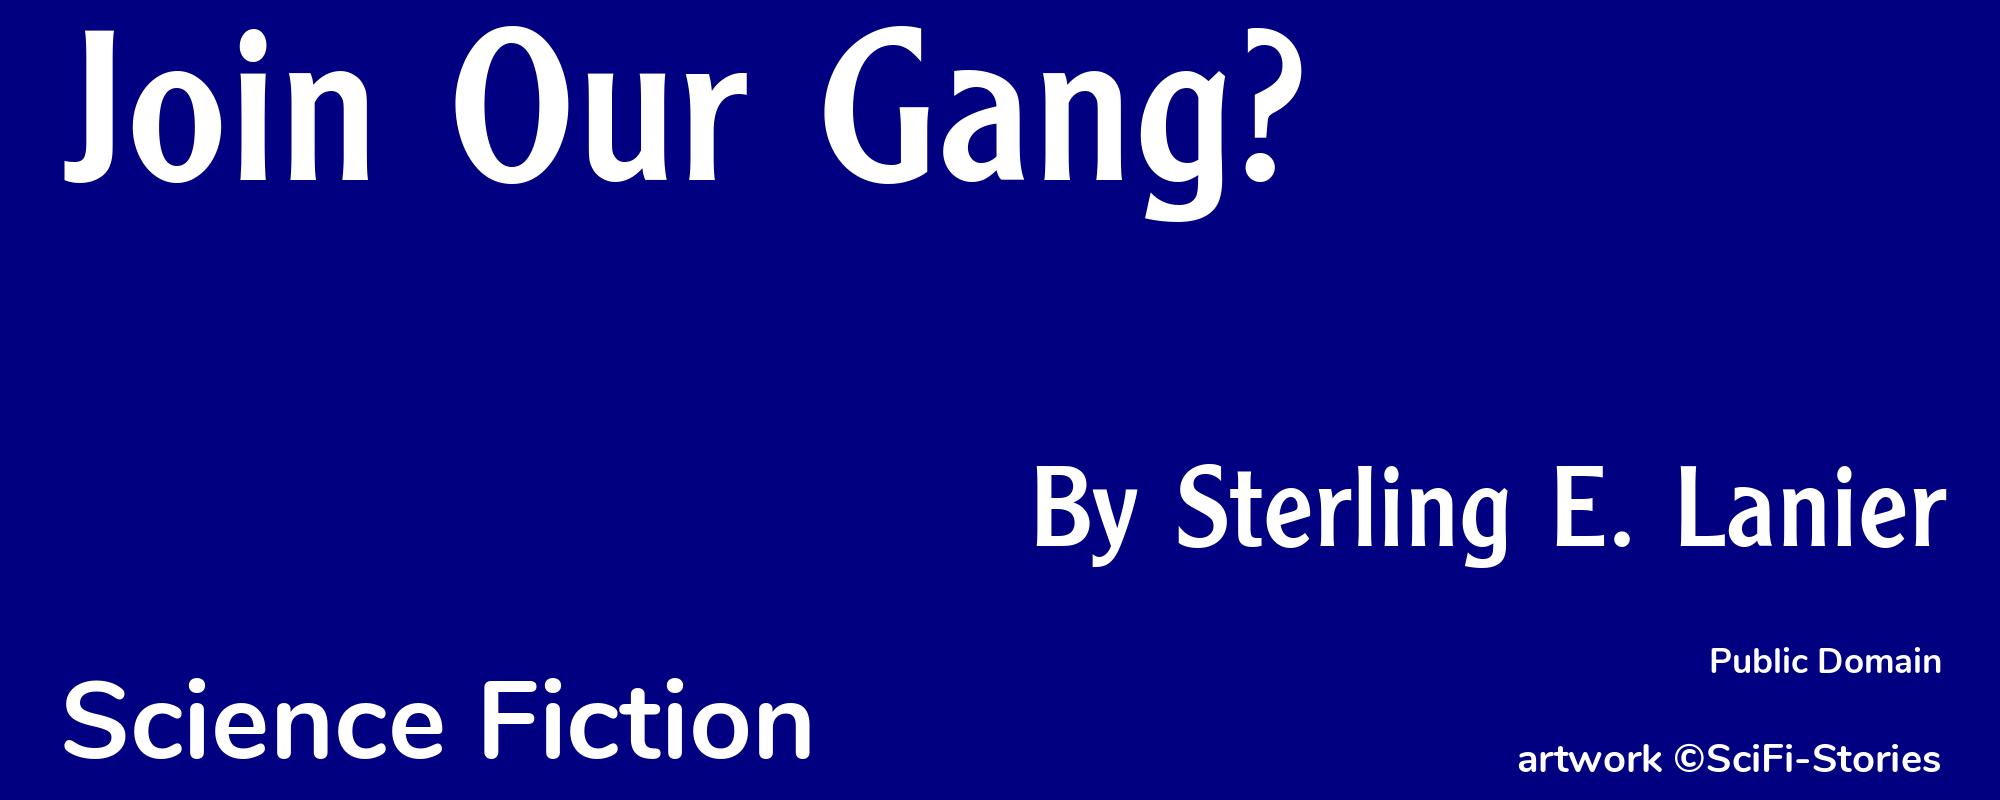 Join Our Gang? - Cover